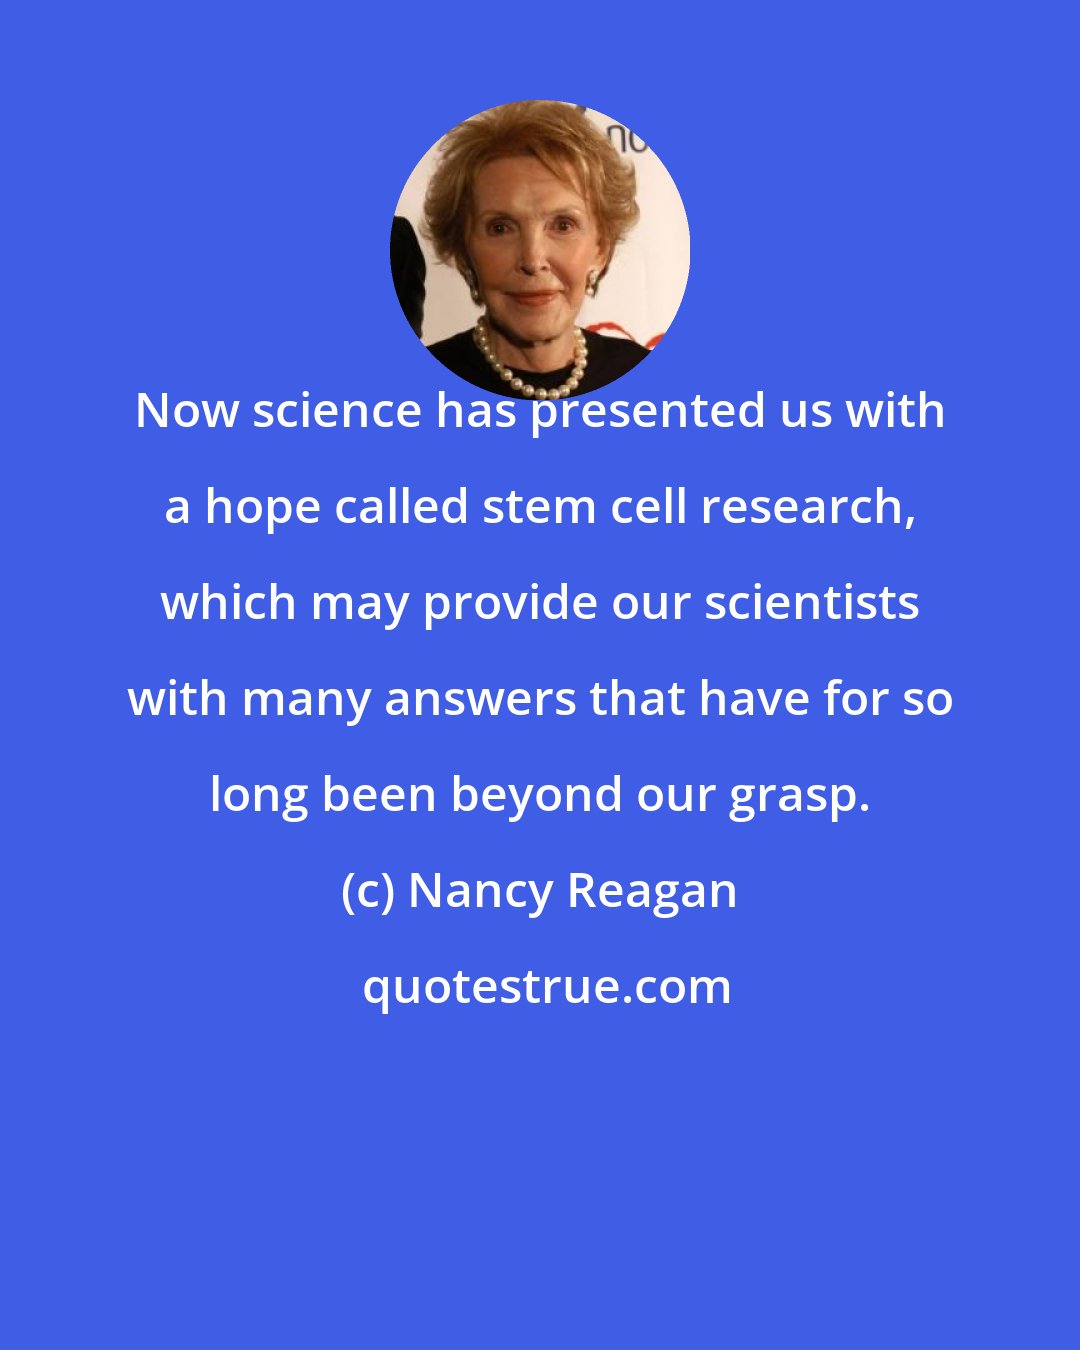 Nancy Reagan: Now science has presented us with a hope called stem cell research, which may provide our scientists with many answers that have for so long been beyond our grasp.